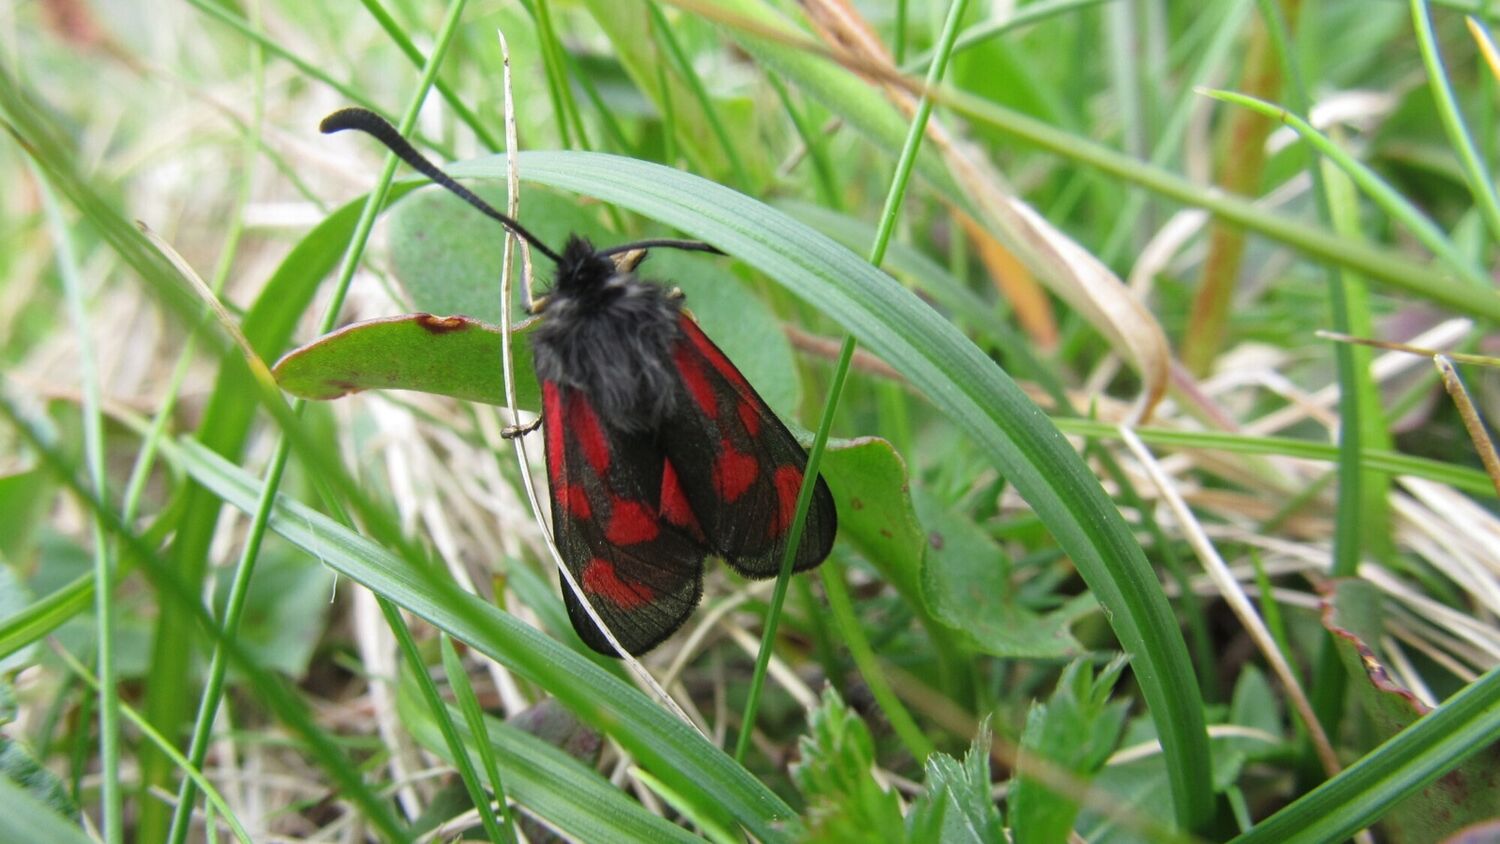 A moth, with black and red colouring, is among long grass.